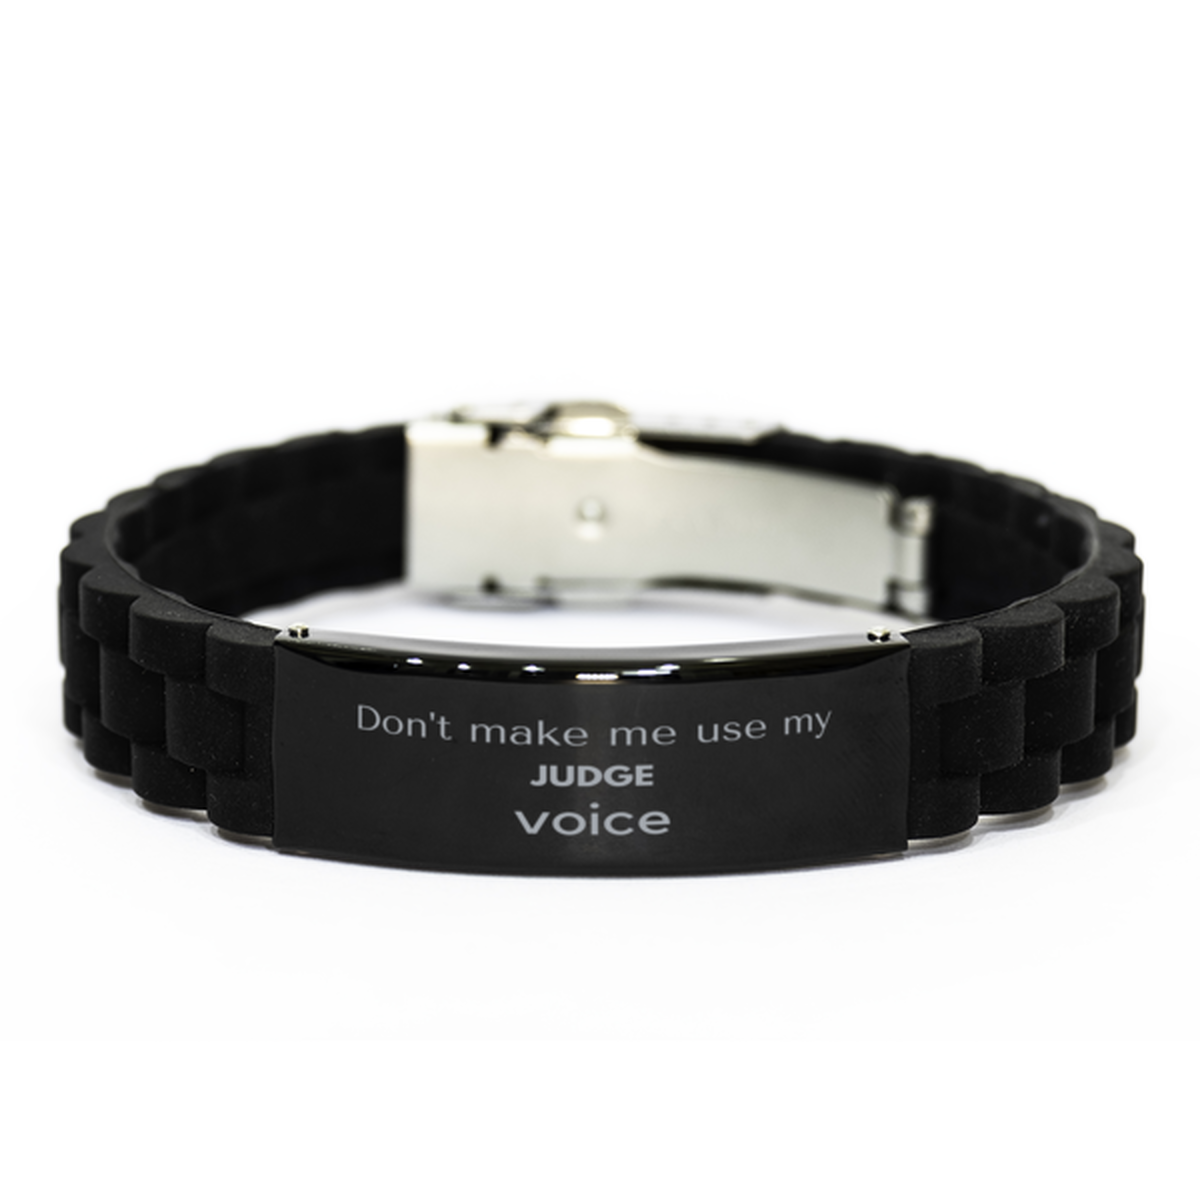 Don't make me use my Judge voice, Sarcasm Judge Gifts, Christmas Judge Black Glidelock Clasp Bracelet Birthday Unique Gifts For Judge Coworkers, Men, Women, Colleague, Friends